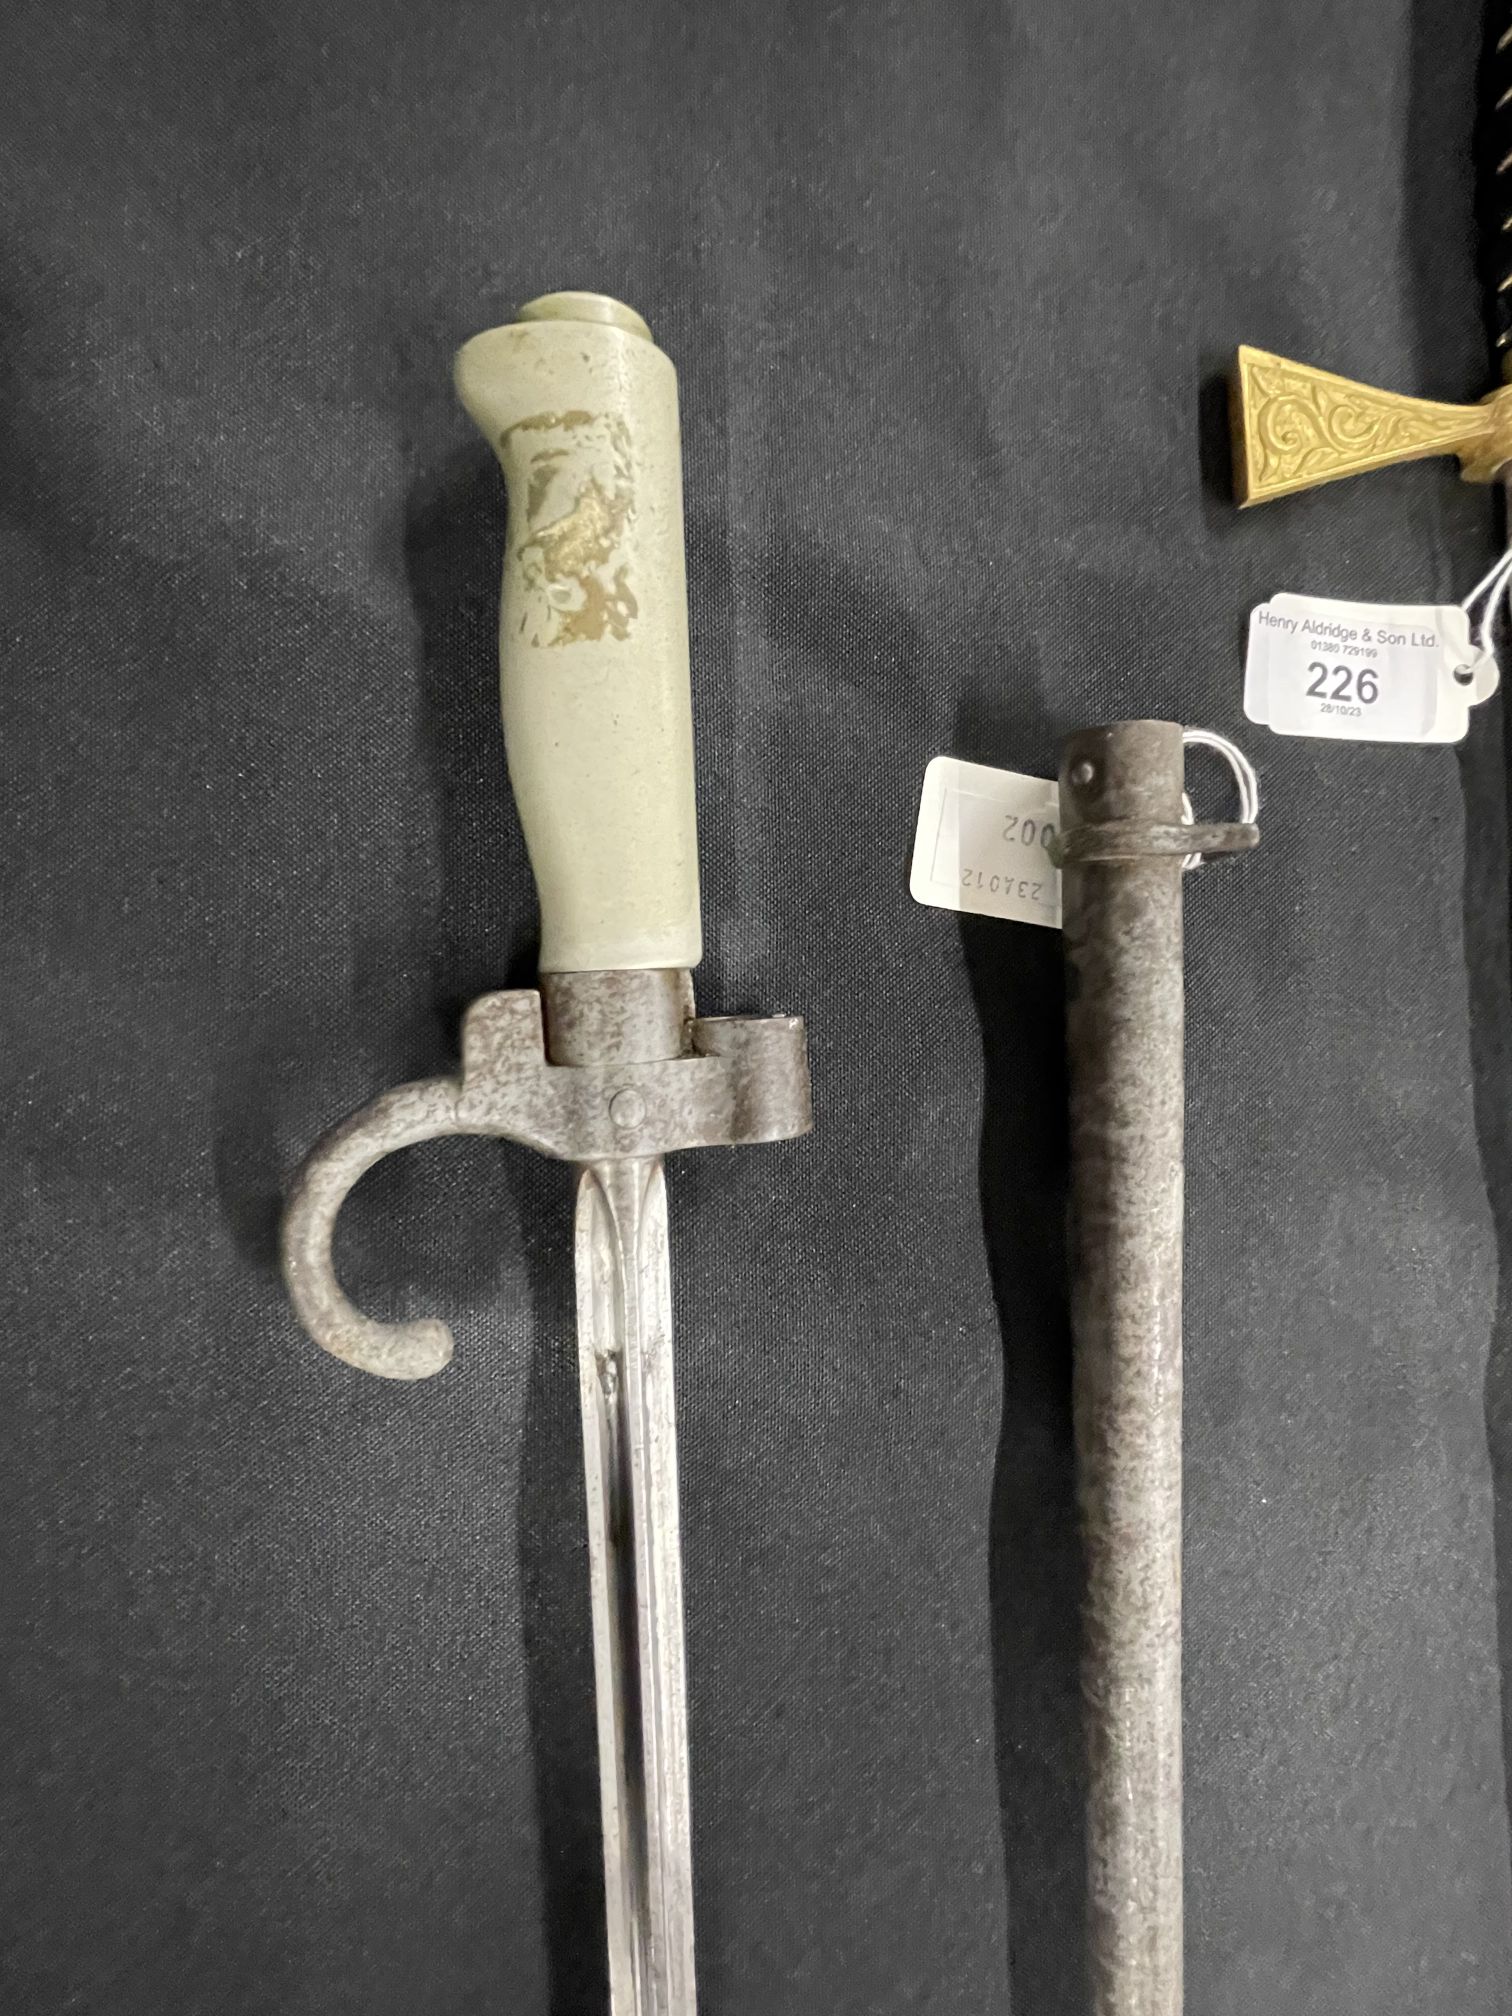 Militaria: Wilkinson's presentation sword with gilt handle, French bayonet. - Image 3 of 3